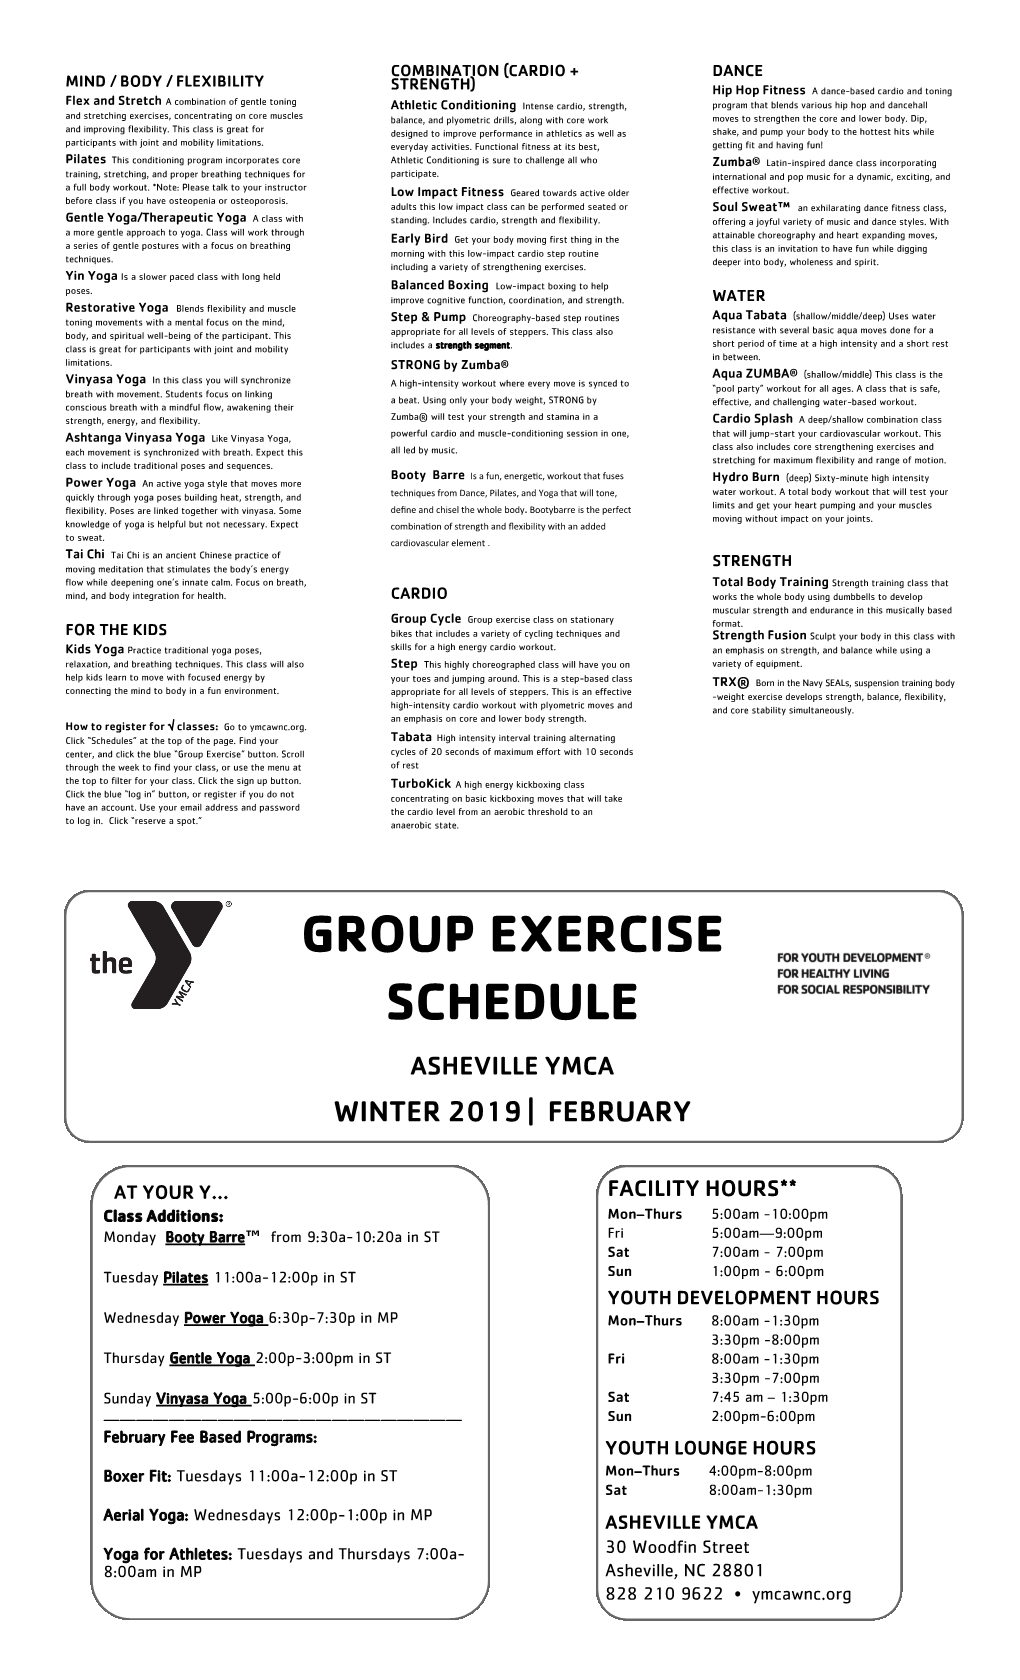 Group Exercise Schedule Asheville Ymca Winter 2019 | February